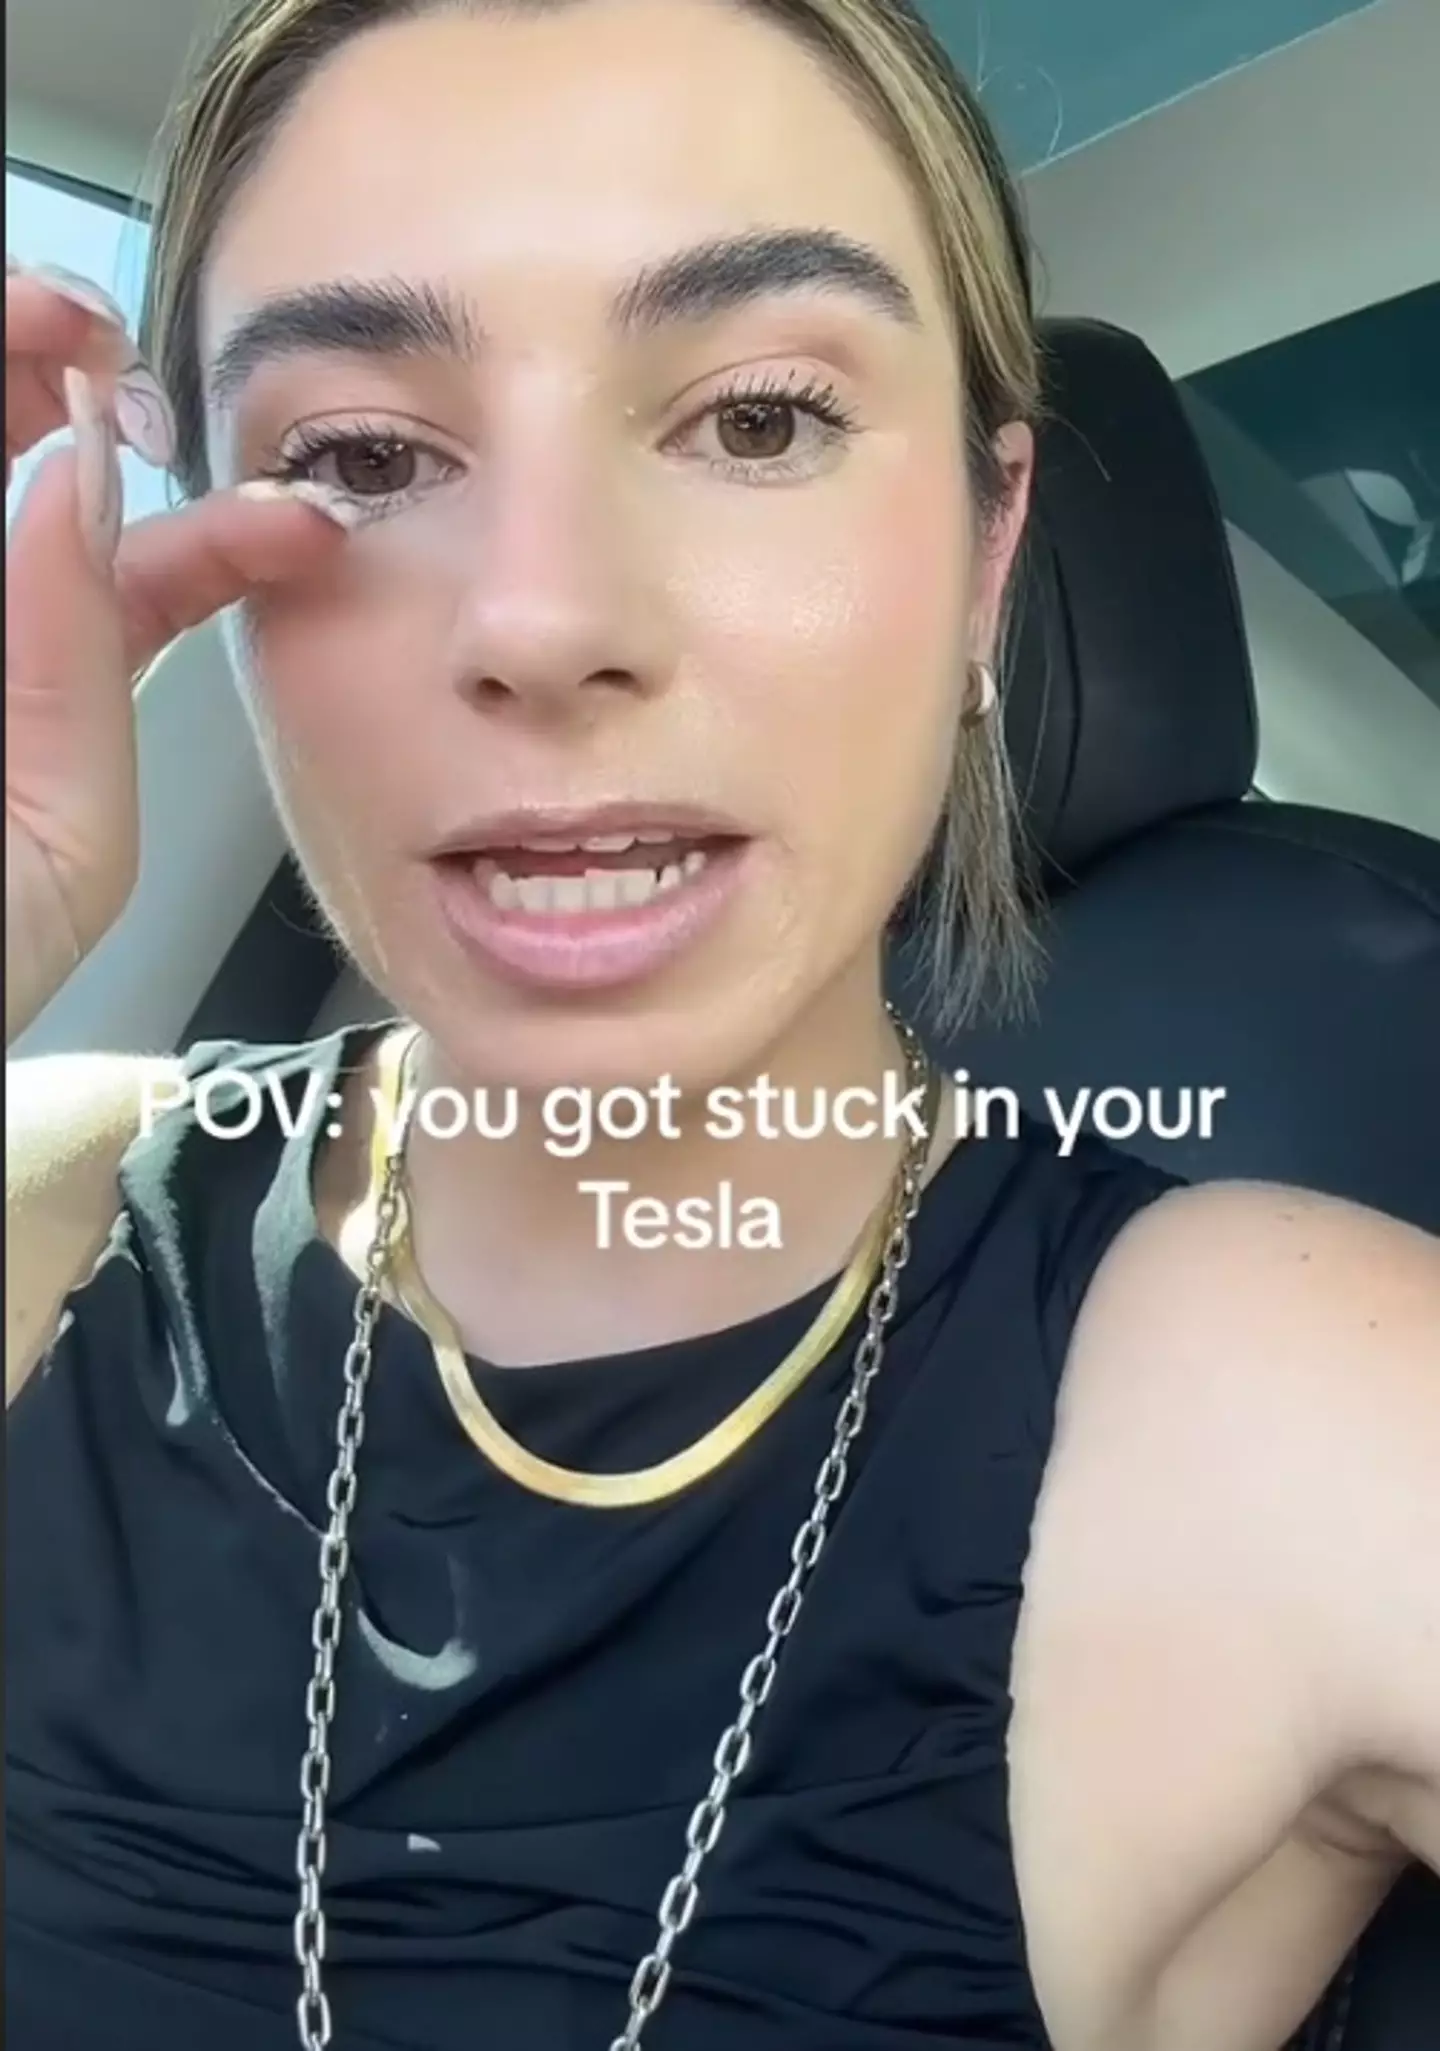 Brianna Janel documented her experience being trapped in a Tesla and went viral on TikTok. (TikTok/@brianna__janel)